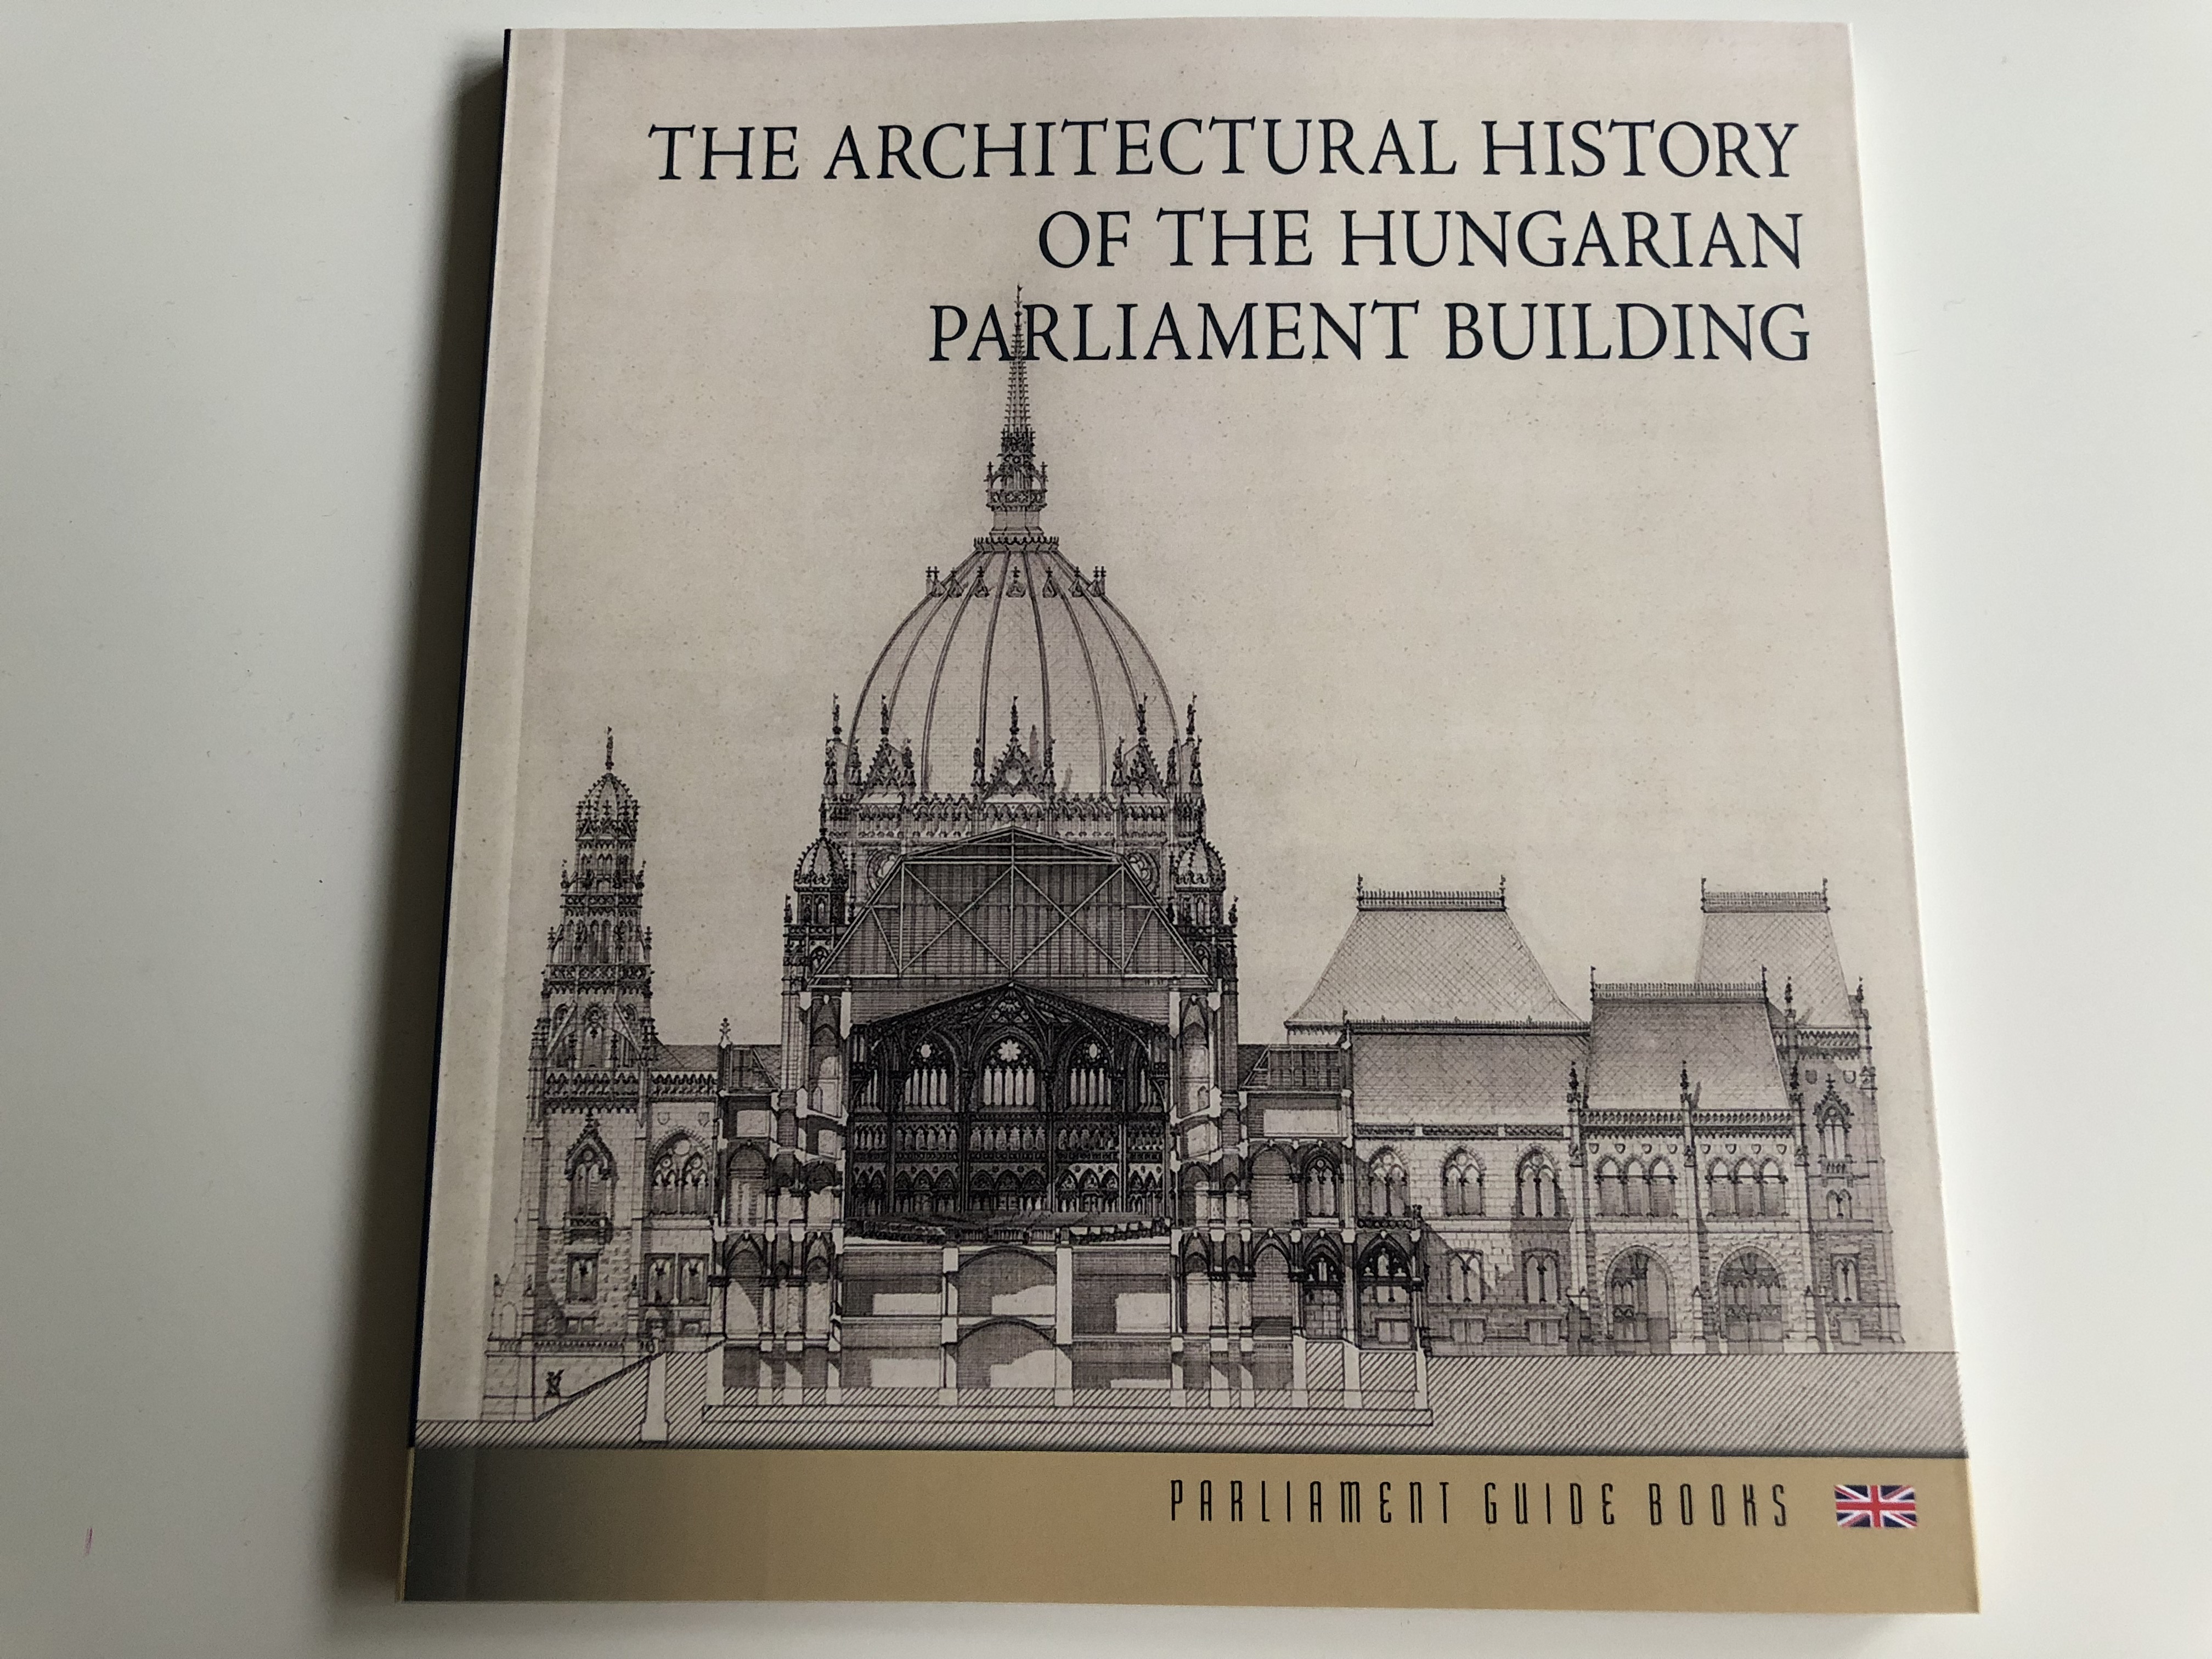 the-architectural-history-of-the-hungarian-parliament-building-by-dorottya-andr-ssy-parliament-guide-books-orsz-gh-z-kiad-2018-1-.jpg